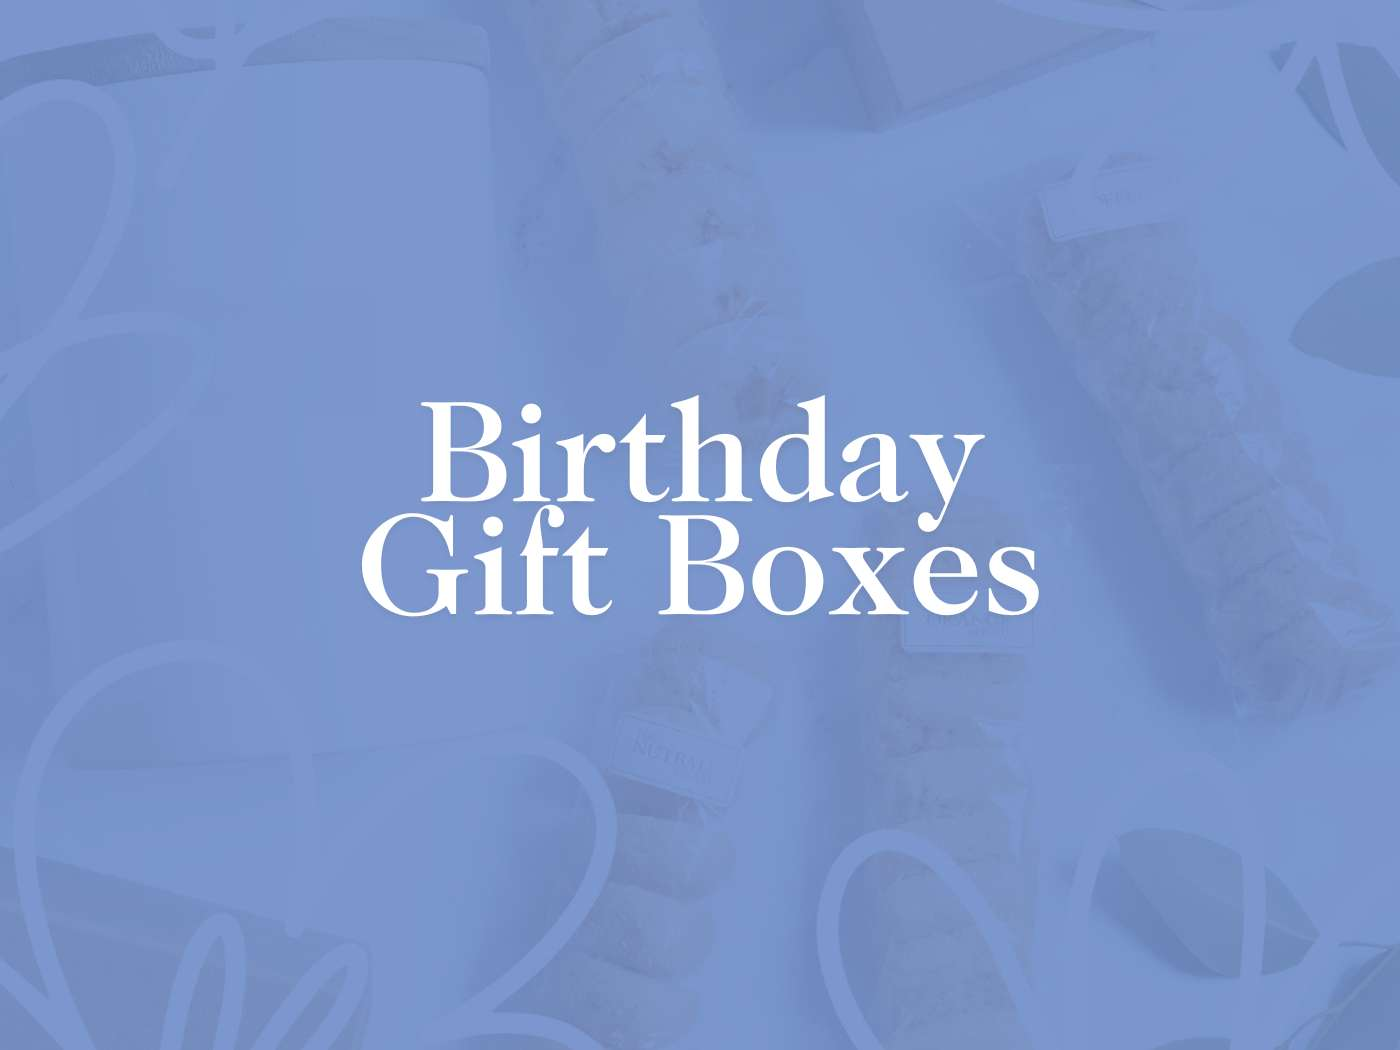 A tastefully designed overlay saying 'Birthday Gift Boxes' in a serene blue palette, suggesting a selection of thoughtful and elegant presents from the Fabulous Flowers and Gifts collection, perfect for making birthdays special.